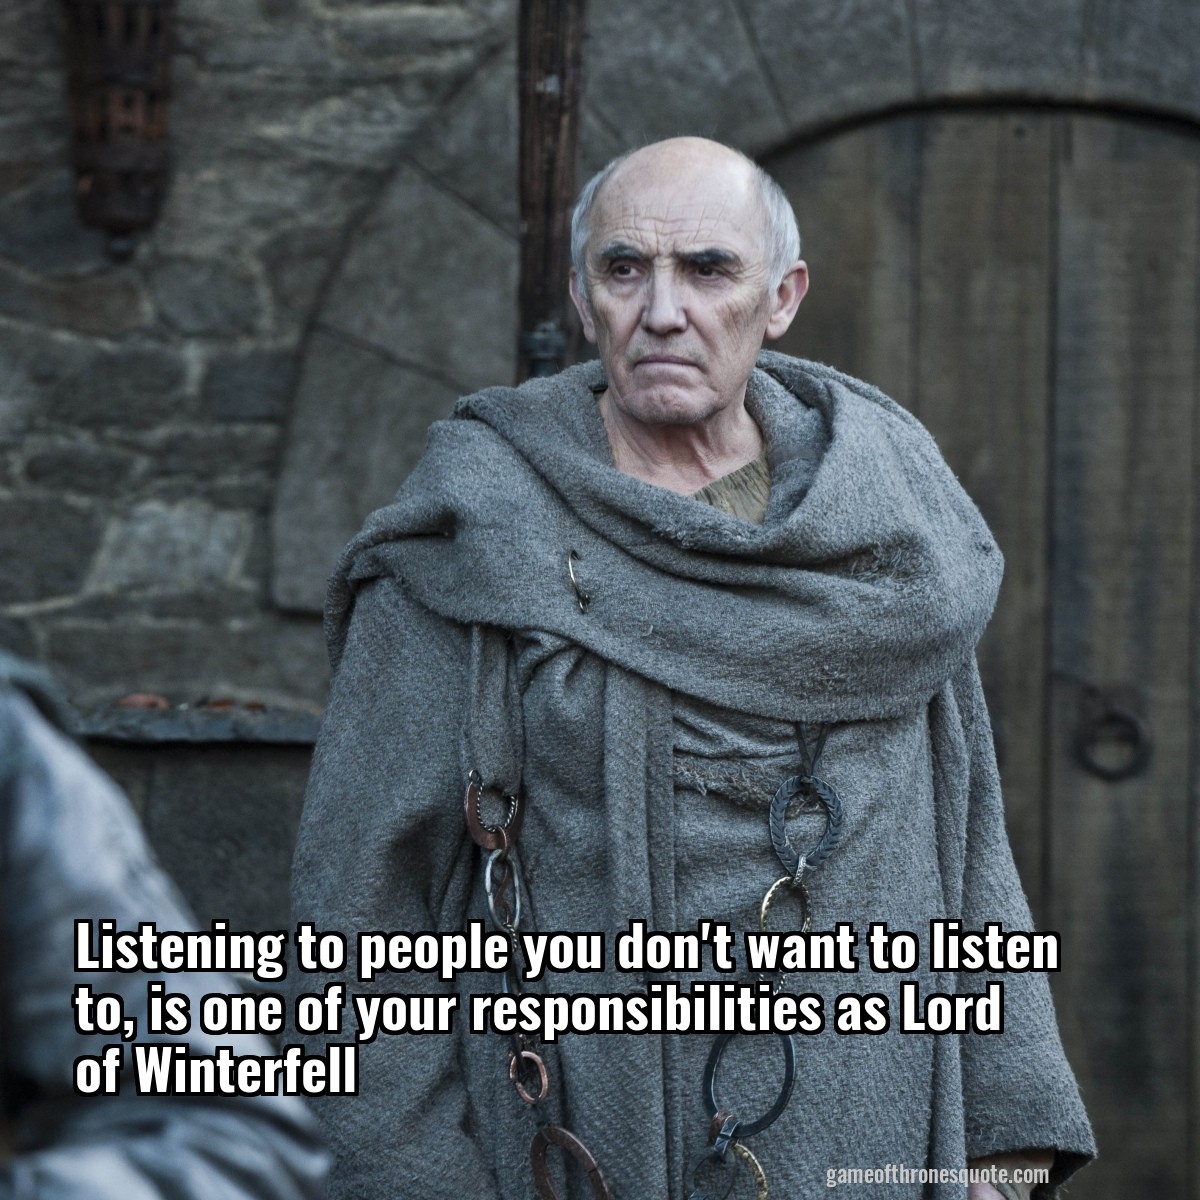 Listening to people you don't want to listen to, is one of your responsibilities as Lord of Winterfell 